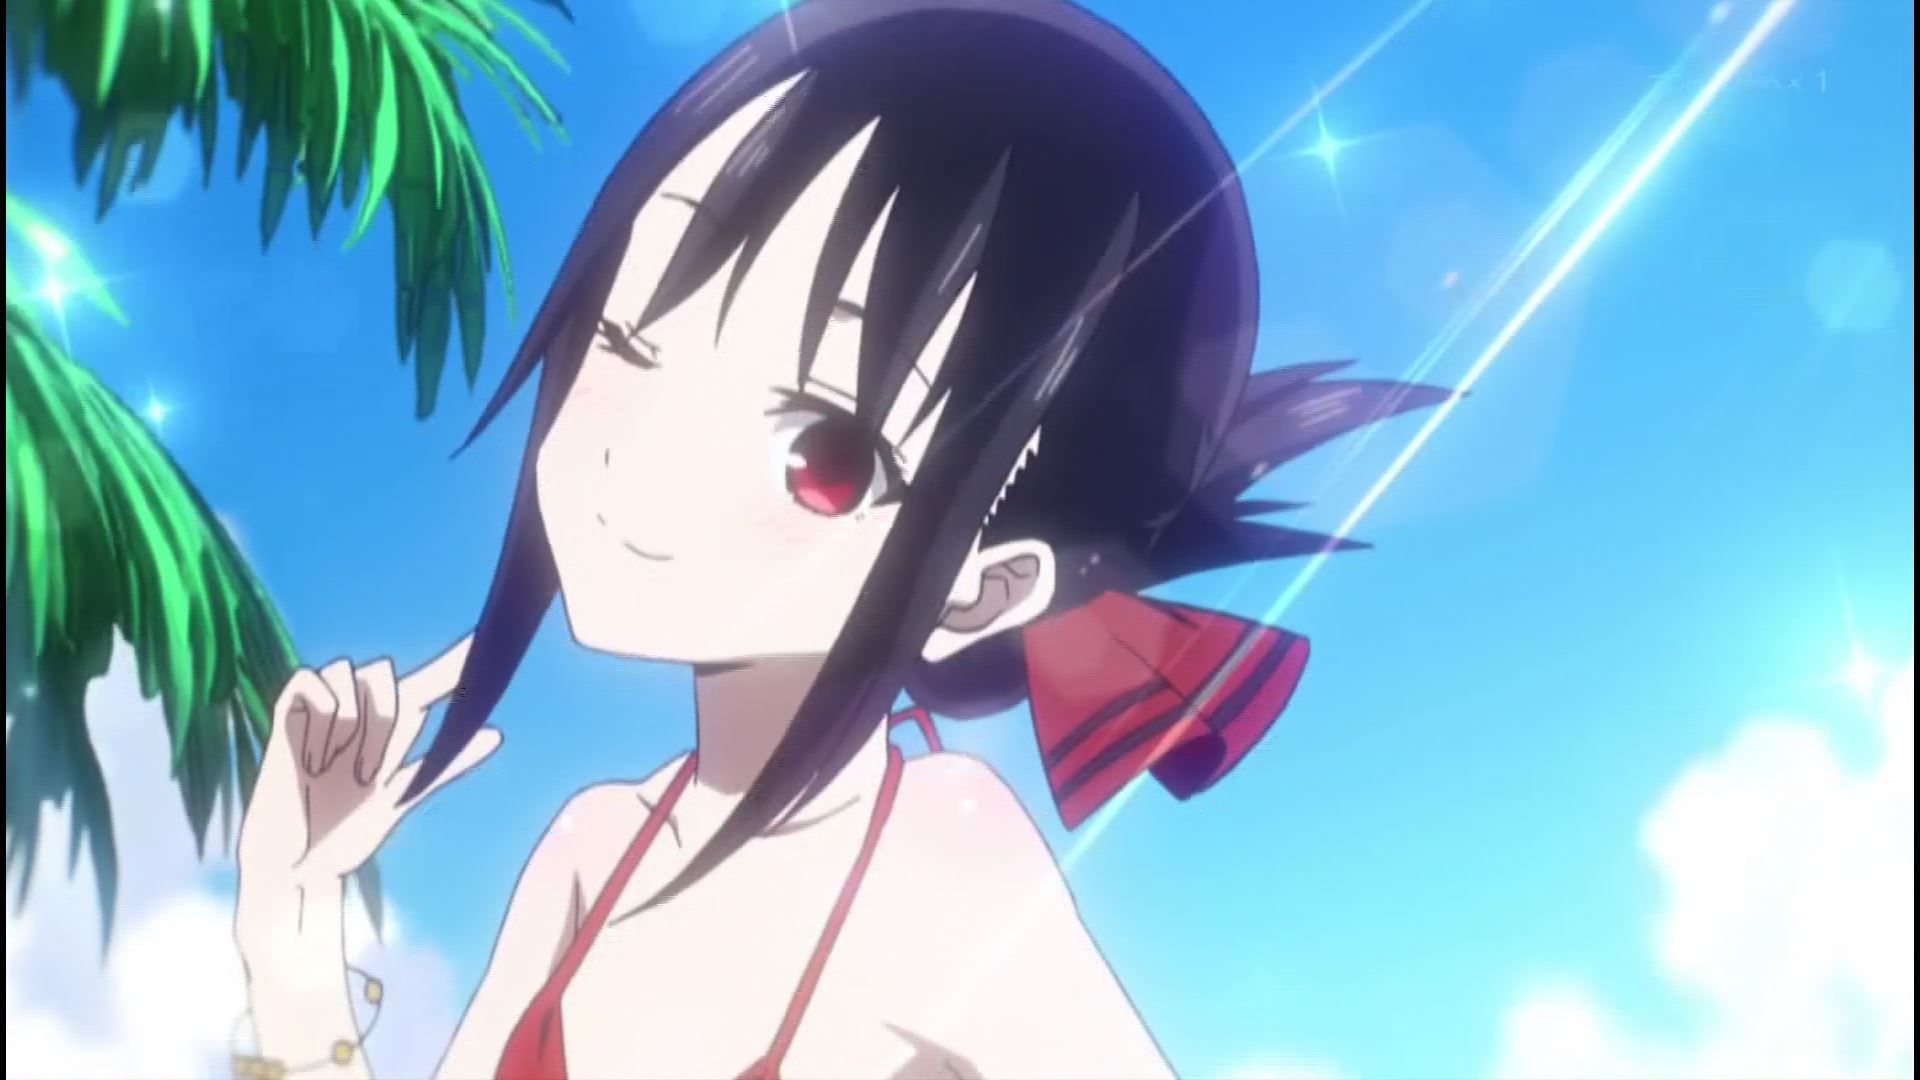 Anime [Kaguya want to be heard] 2 in the story of a girl erotic Pettanko swimsuit and breasts! 4